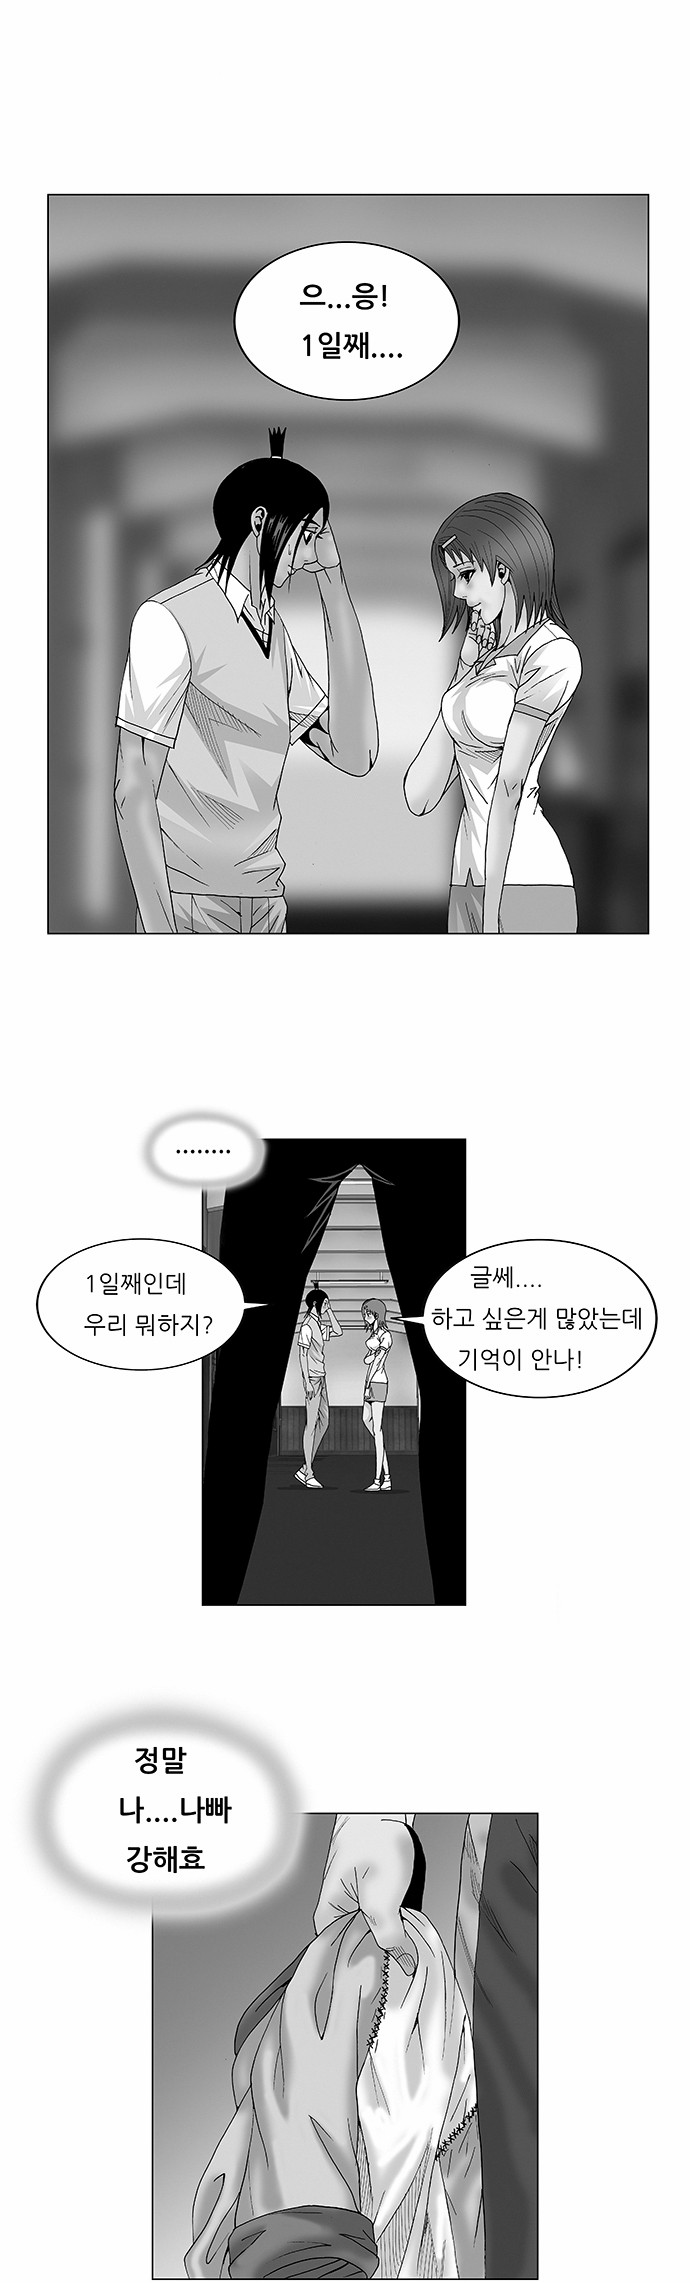 Ultimate Legend - Kang Hae Hyo - Chapter 70 - Page 1